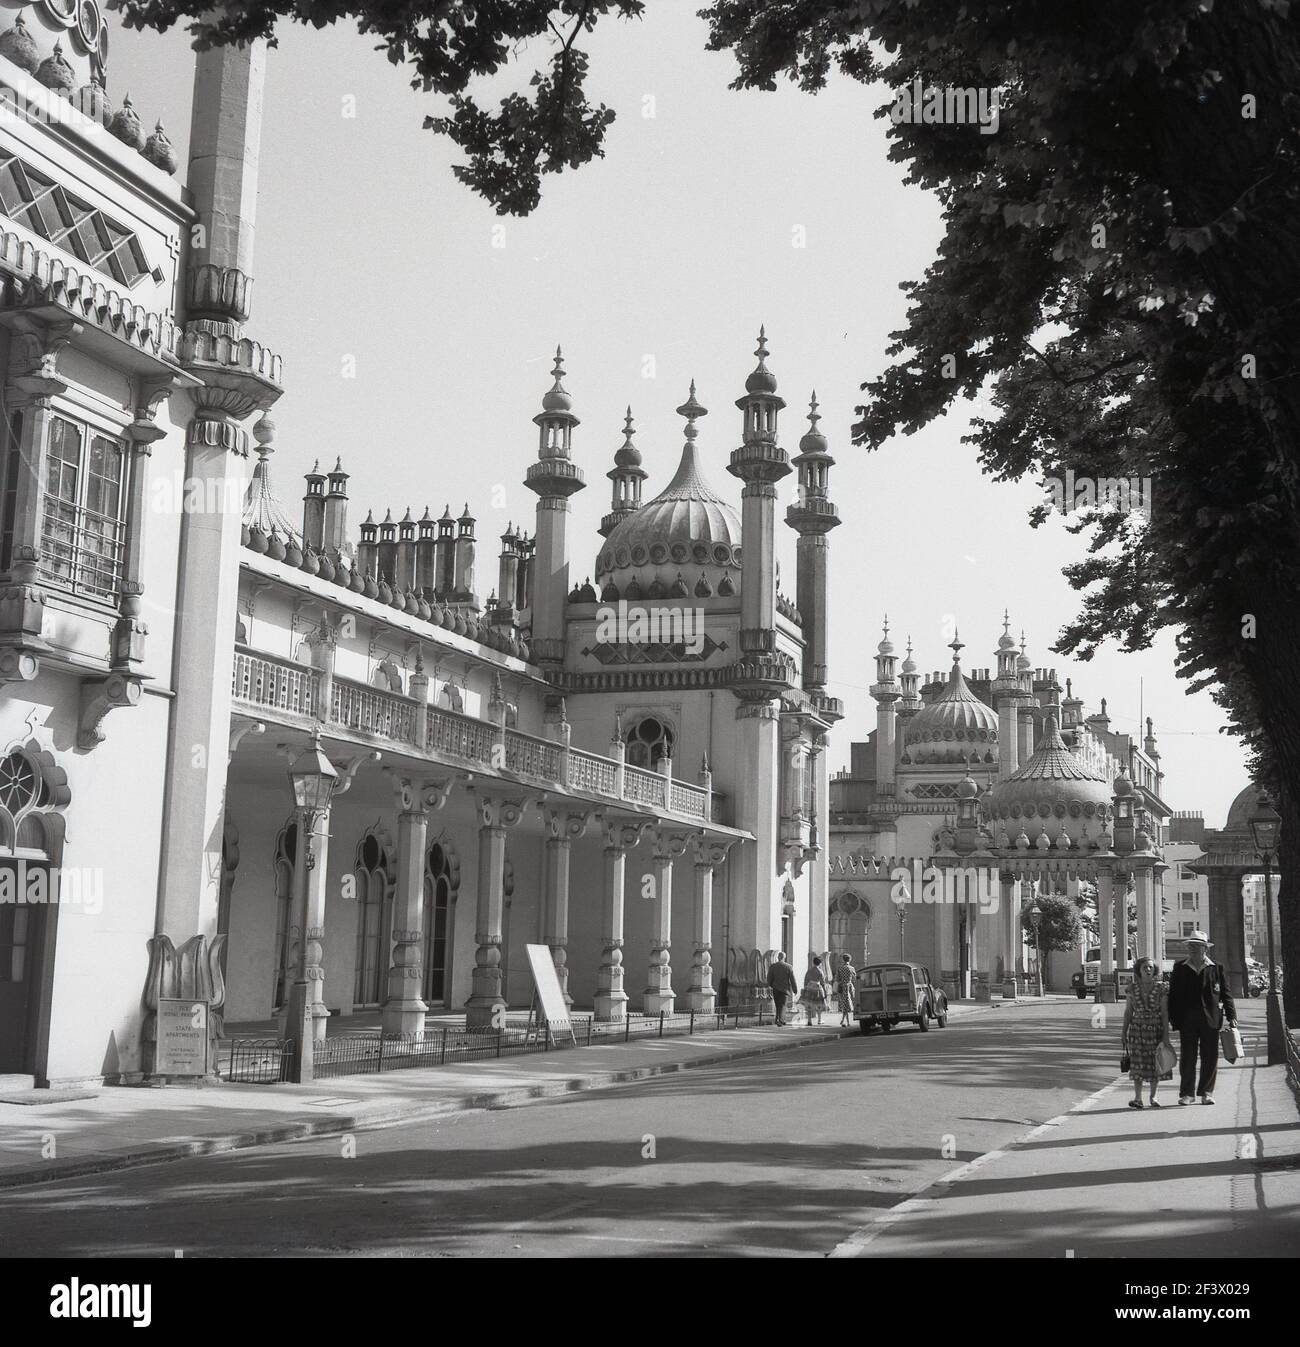 1950s, historical, exterior view of the Royal Pavilion, Brighton, East Sussex, England, UK, a royal residence originally built for George, Prince of Wales, who became the Prince Regent in 1811 and King George IV in 1820. Built in three stages from 1787 and completed 1823, its architects include famous names such as John Nash and Augustus Charles Pugin. Stock Photo